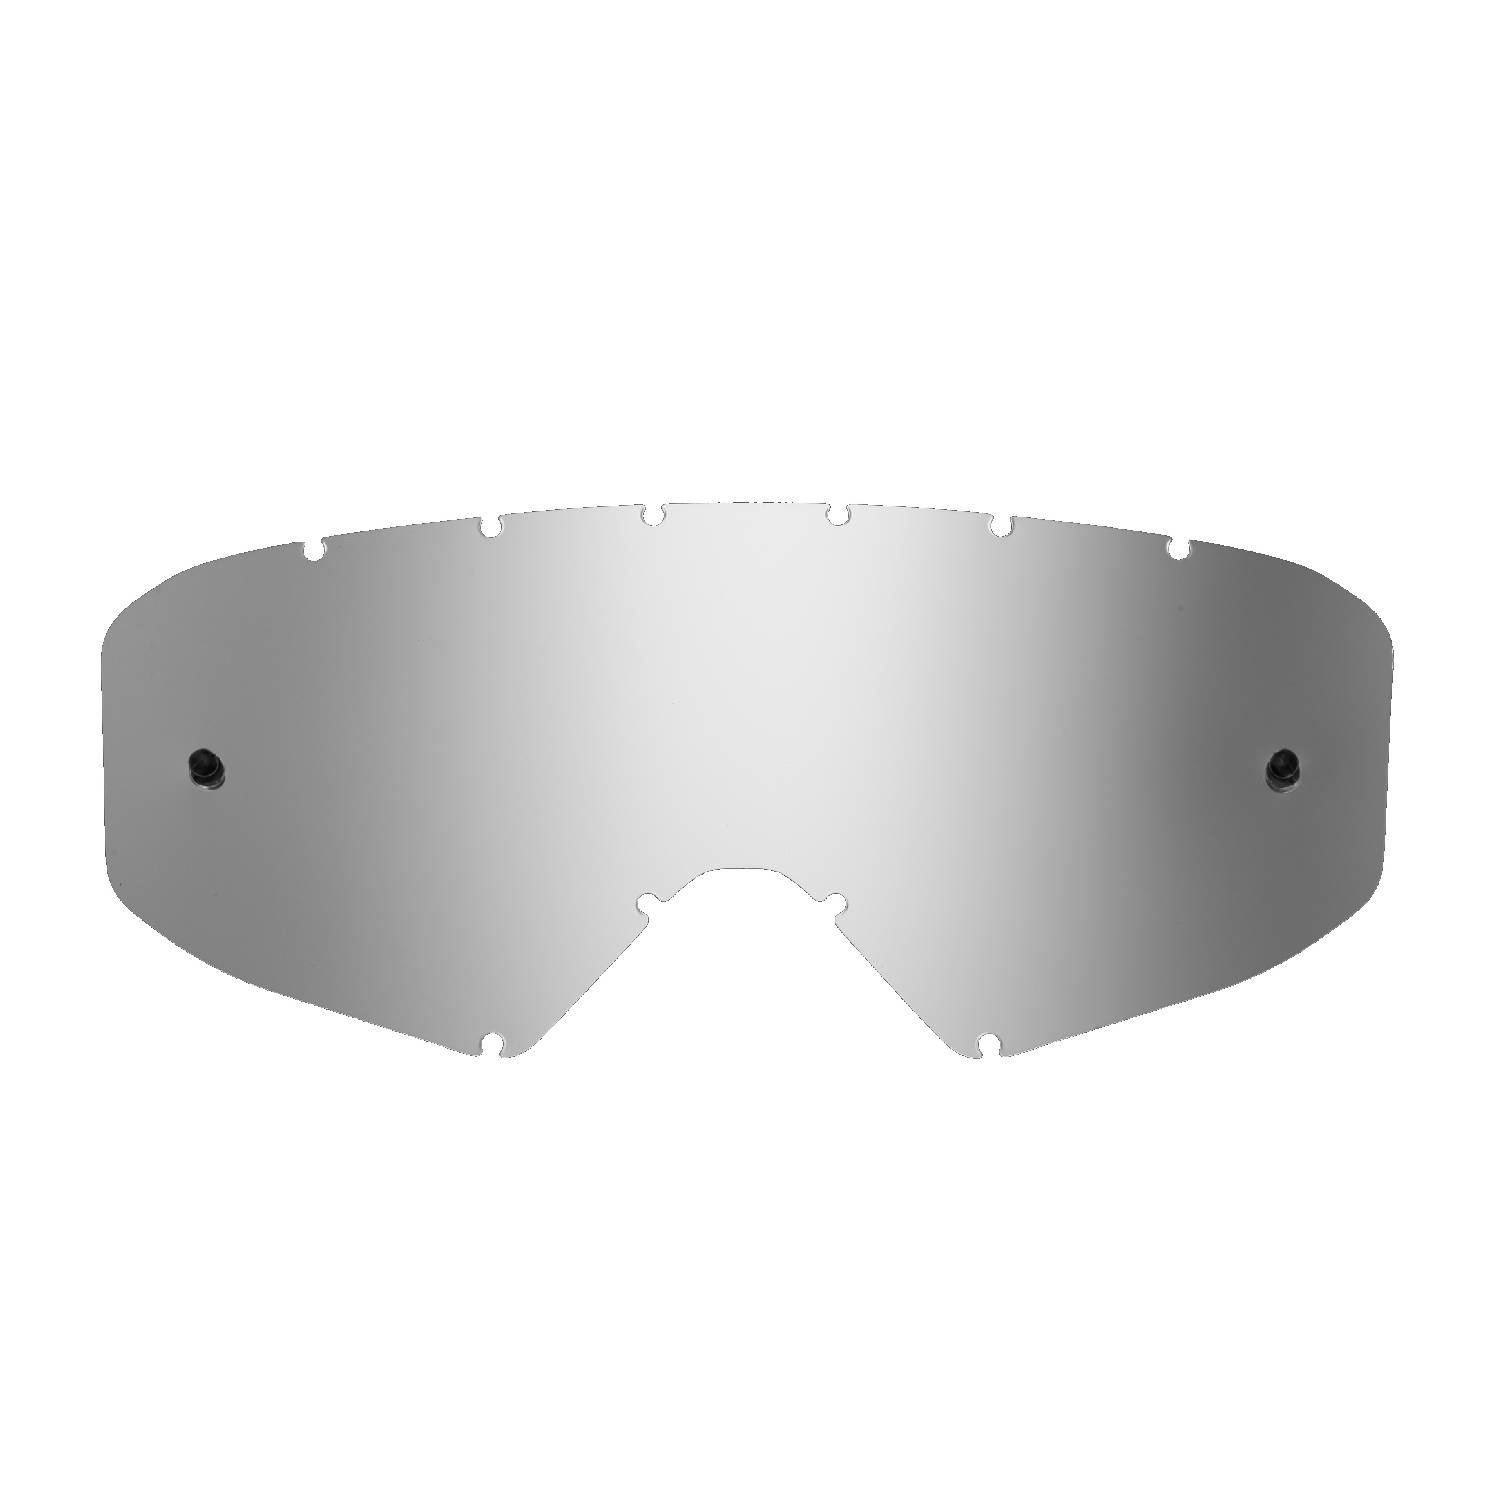 silver-toned mirrored replacement lens compatible for Ethen Zerocinque Primis / R / Ares / Ares Pluma cross goggles / goggles